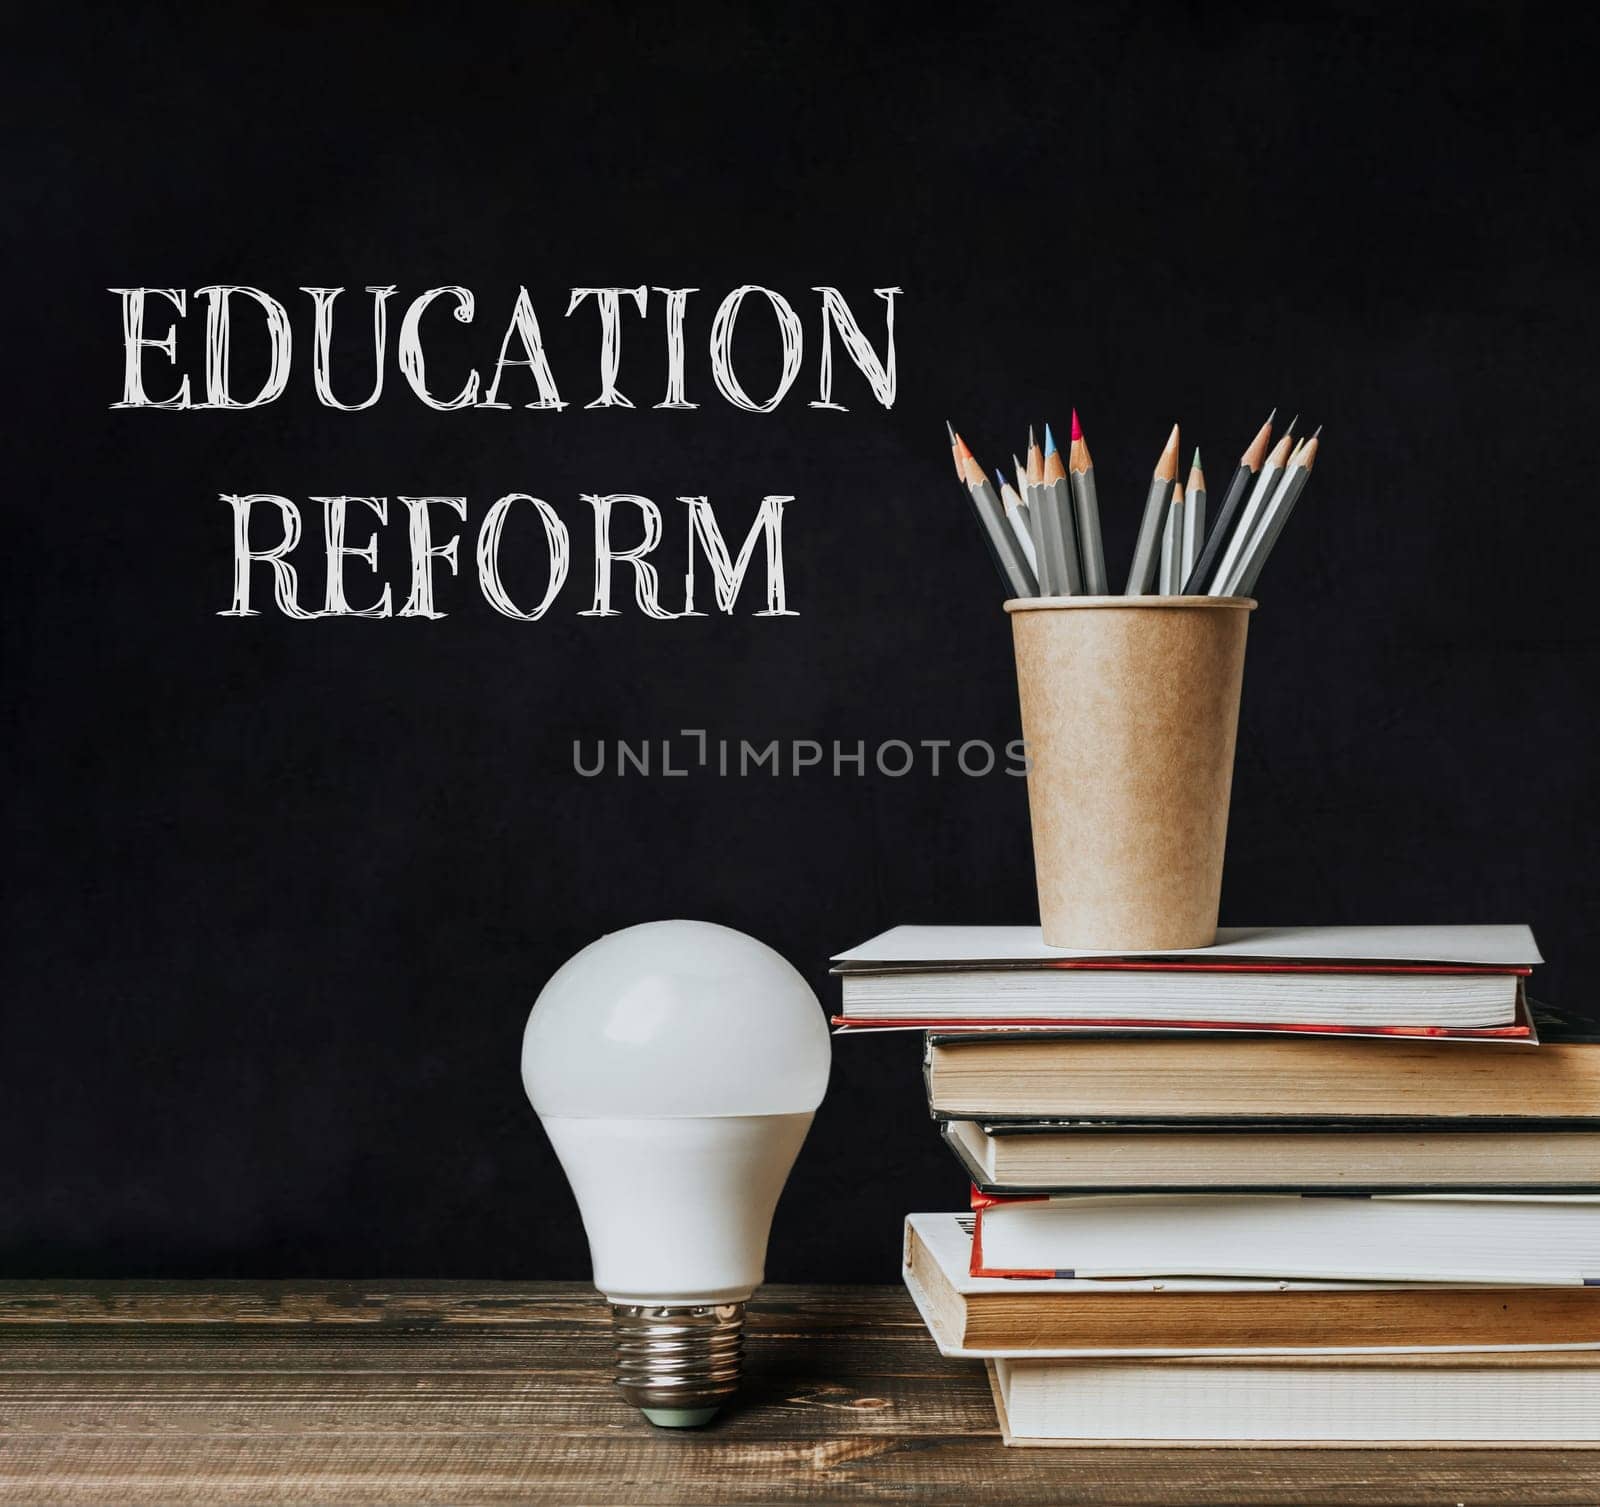 A blackboard with a white light bulb on it and a stack of books. The words Education Reform are written in black on the board